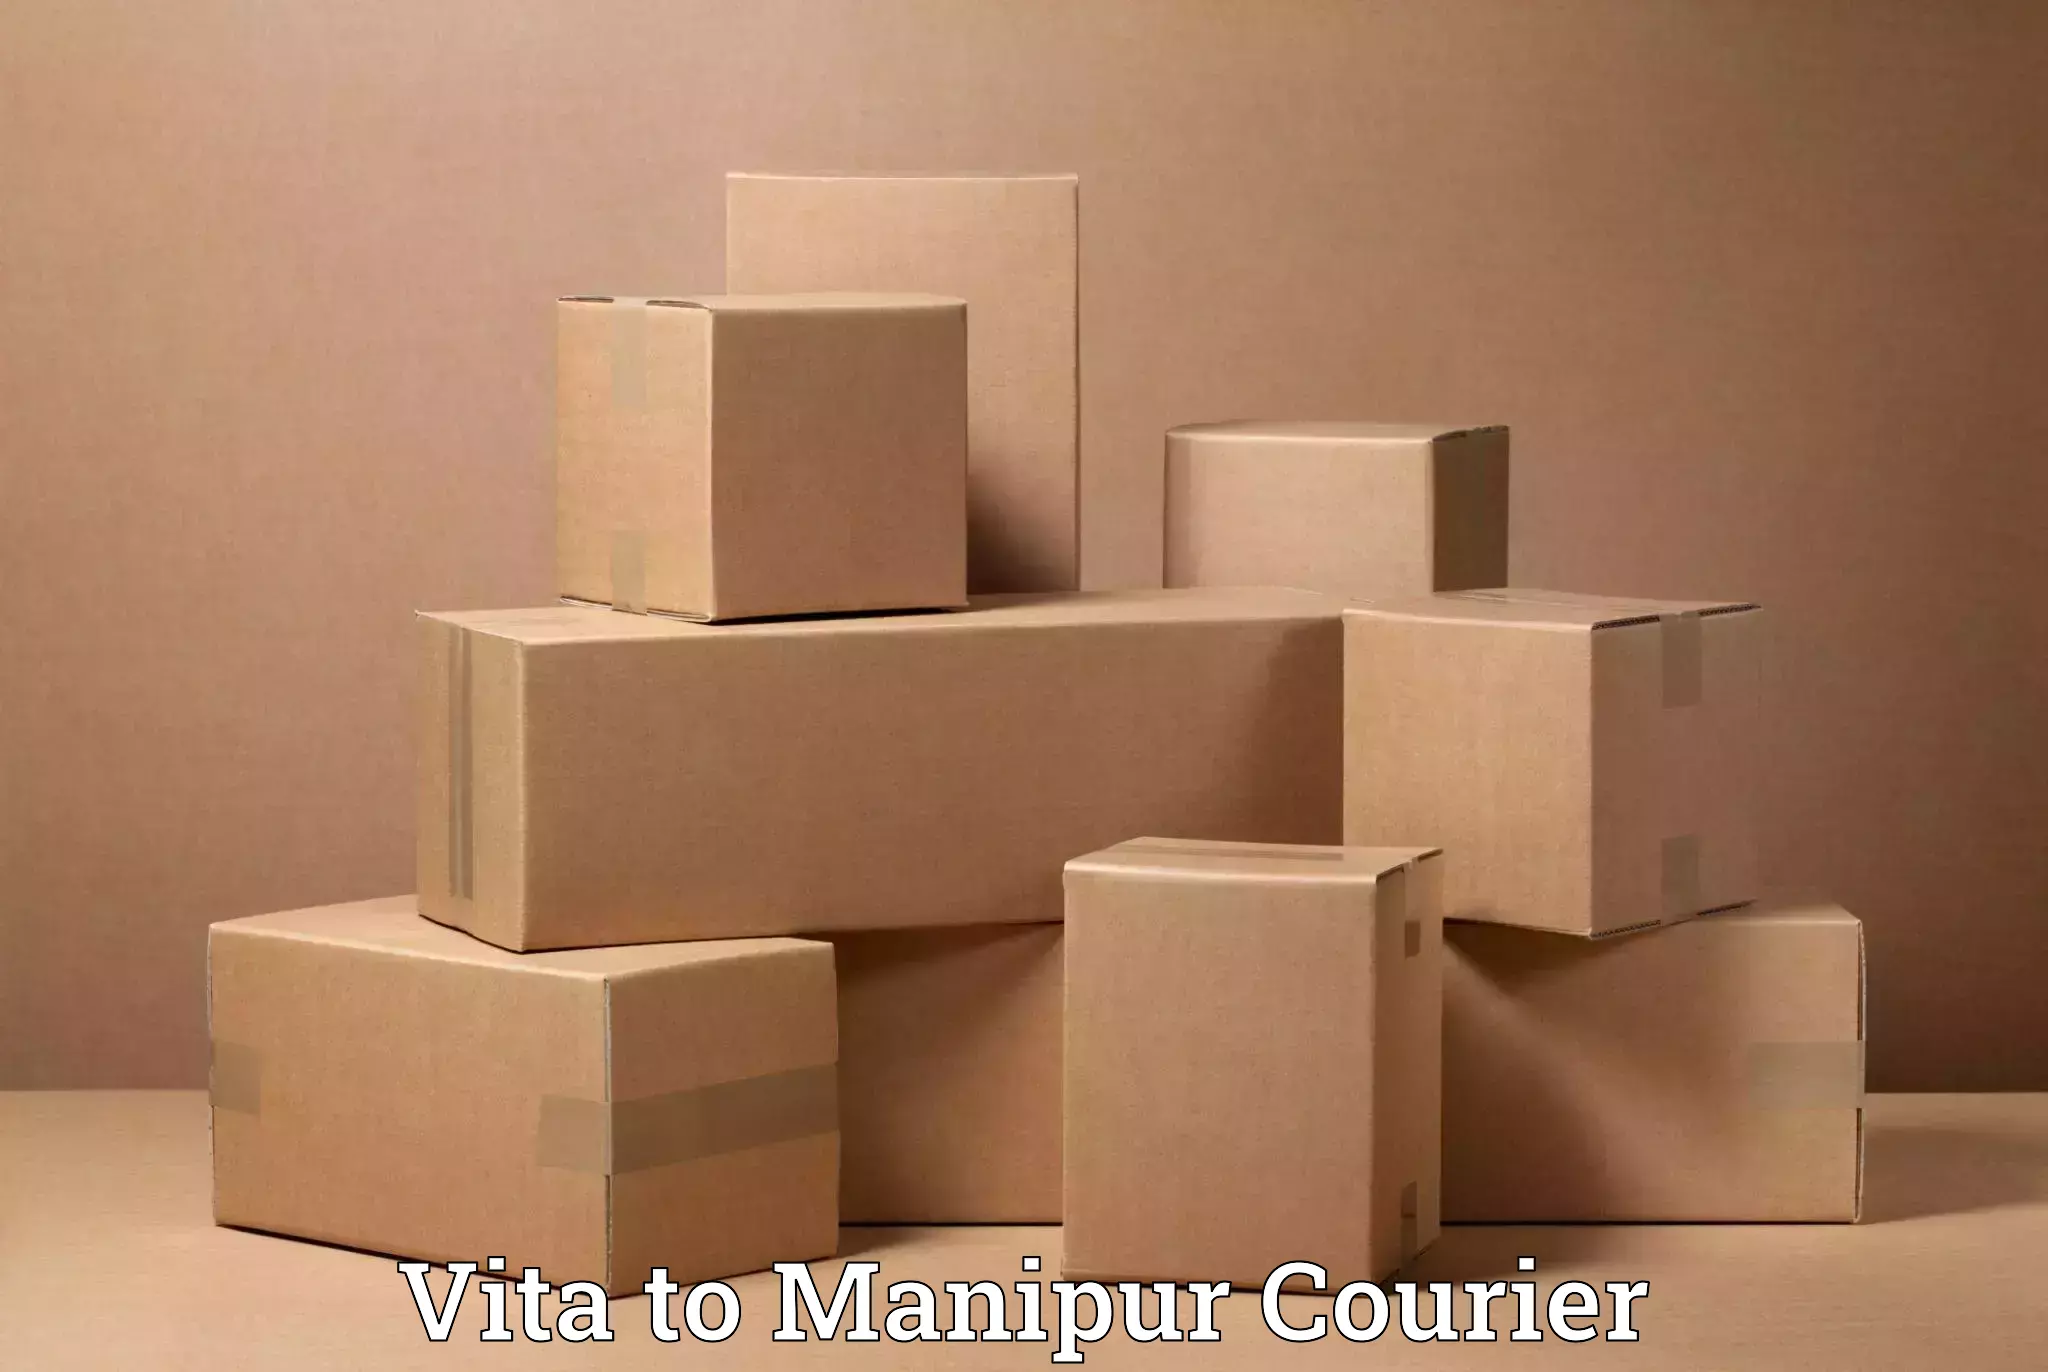 Home moving specialists Vita to Manipur